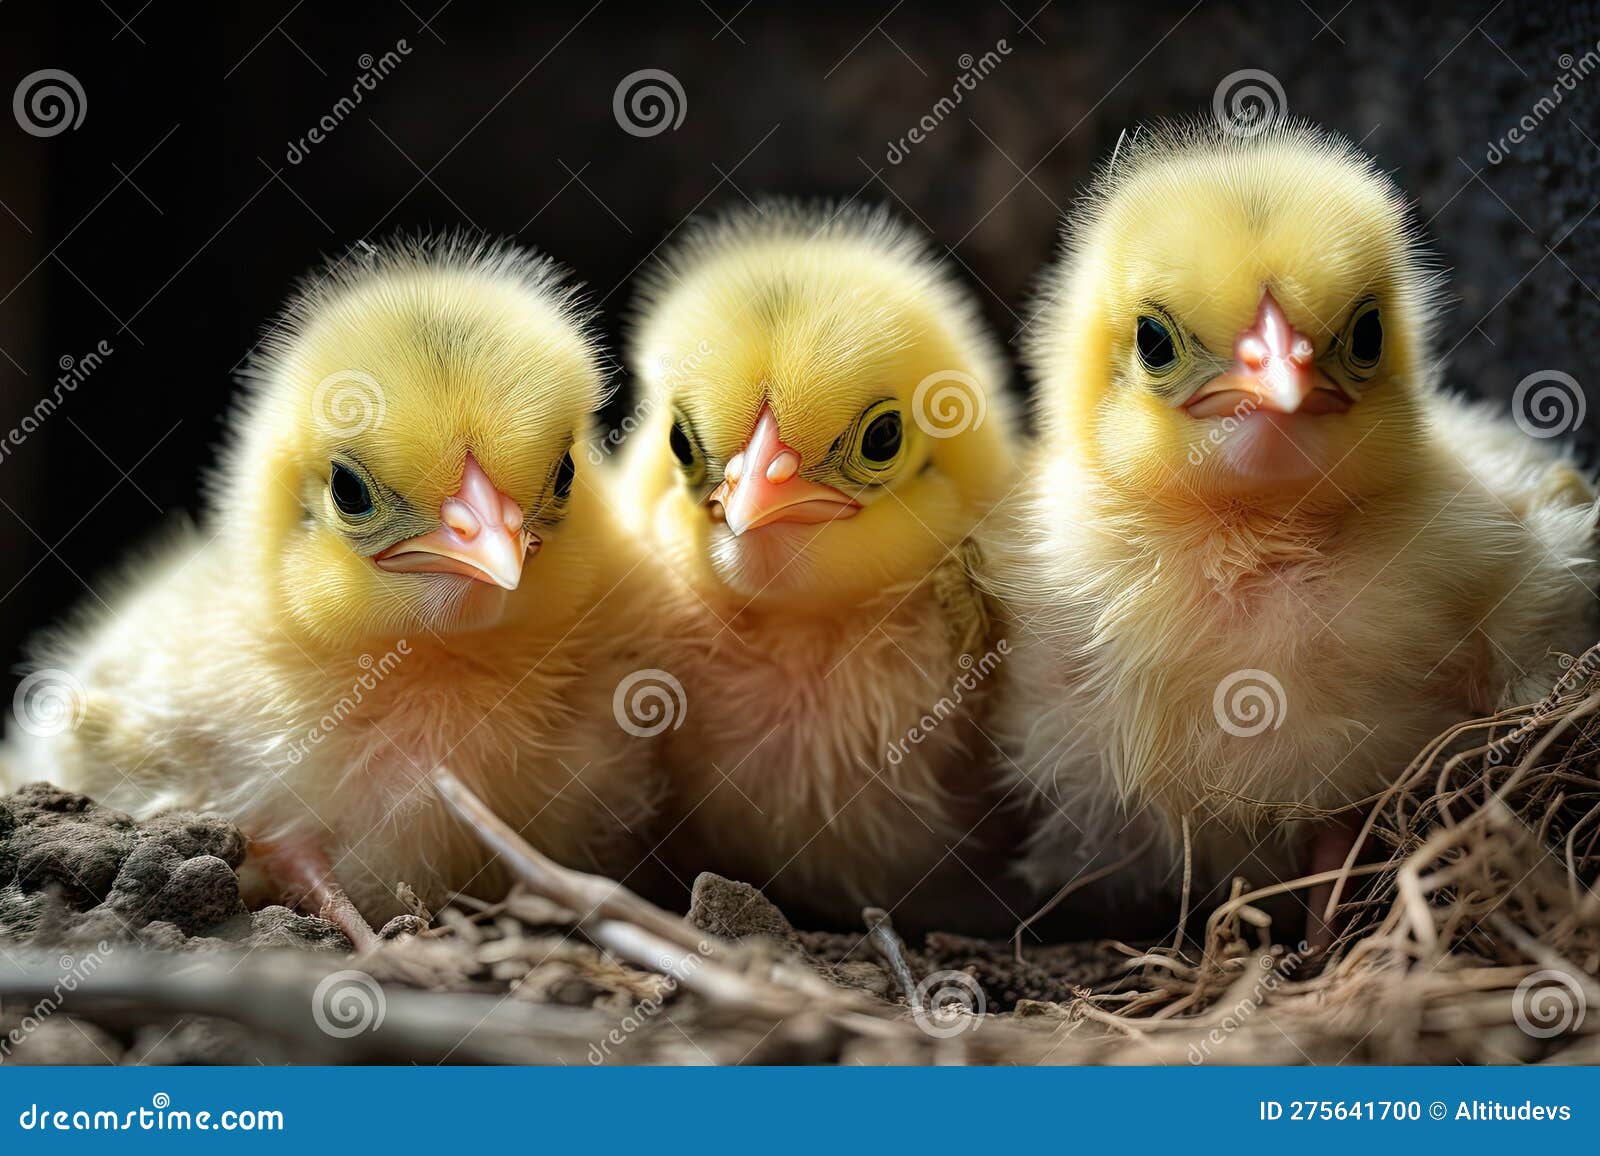 nest of fluffy yellow chicks with their beaks open, ready to chirp